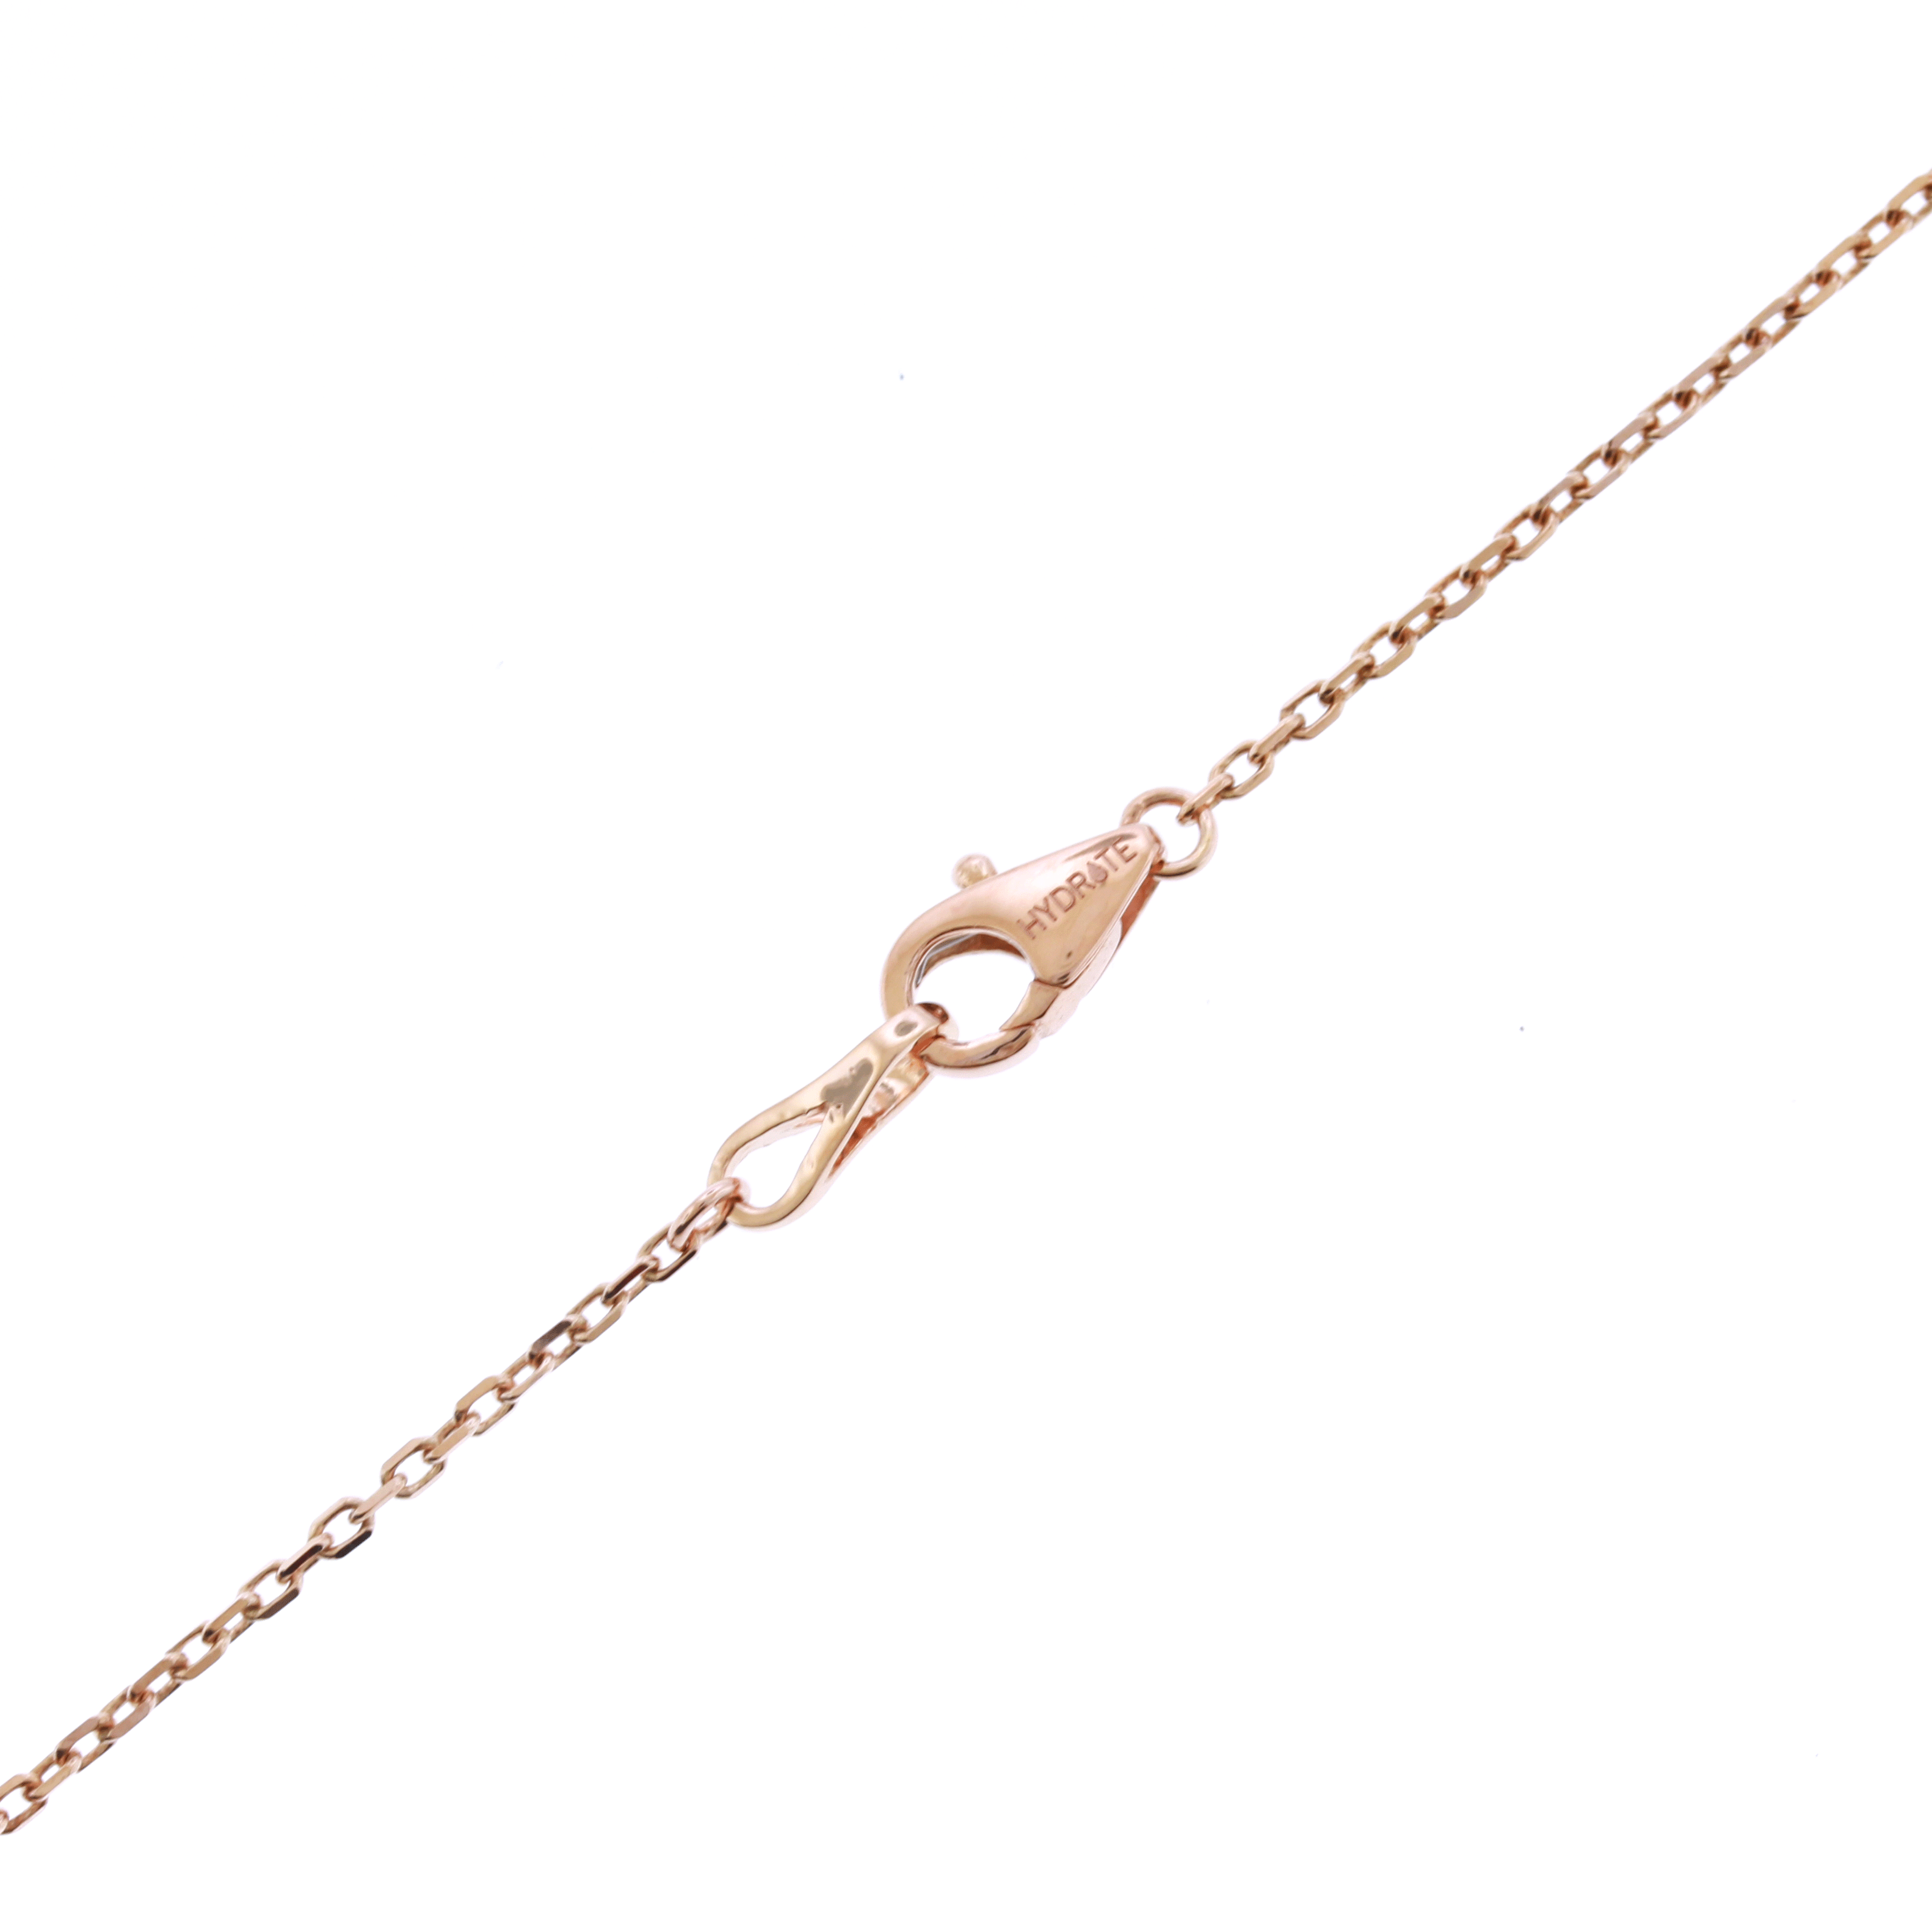 Natural Diamond Heart Necklace -14K Rose Gold (7/8ctw)